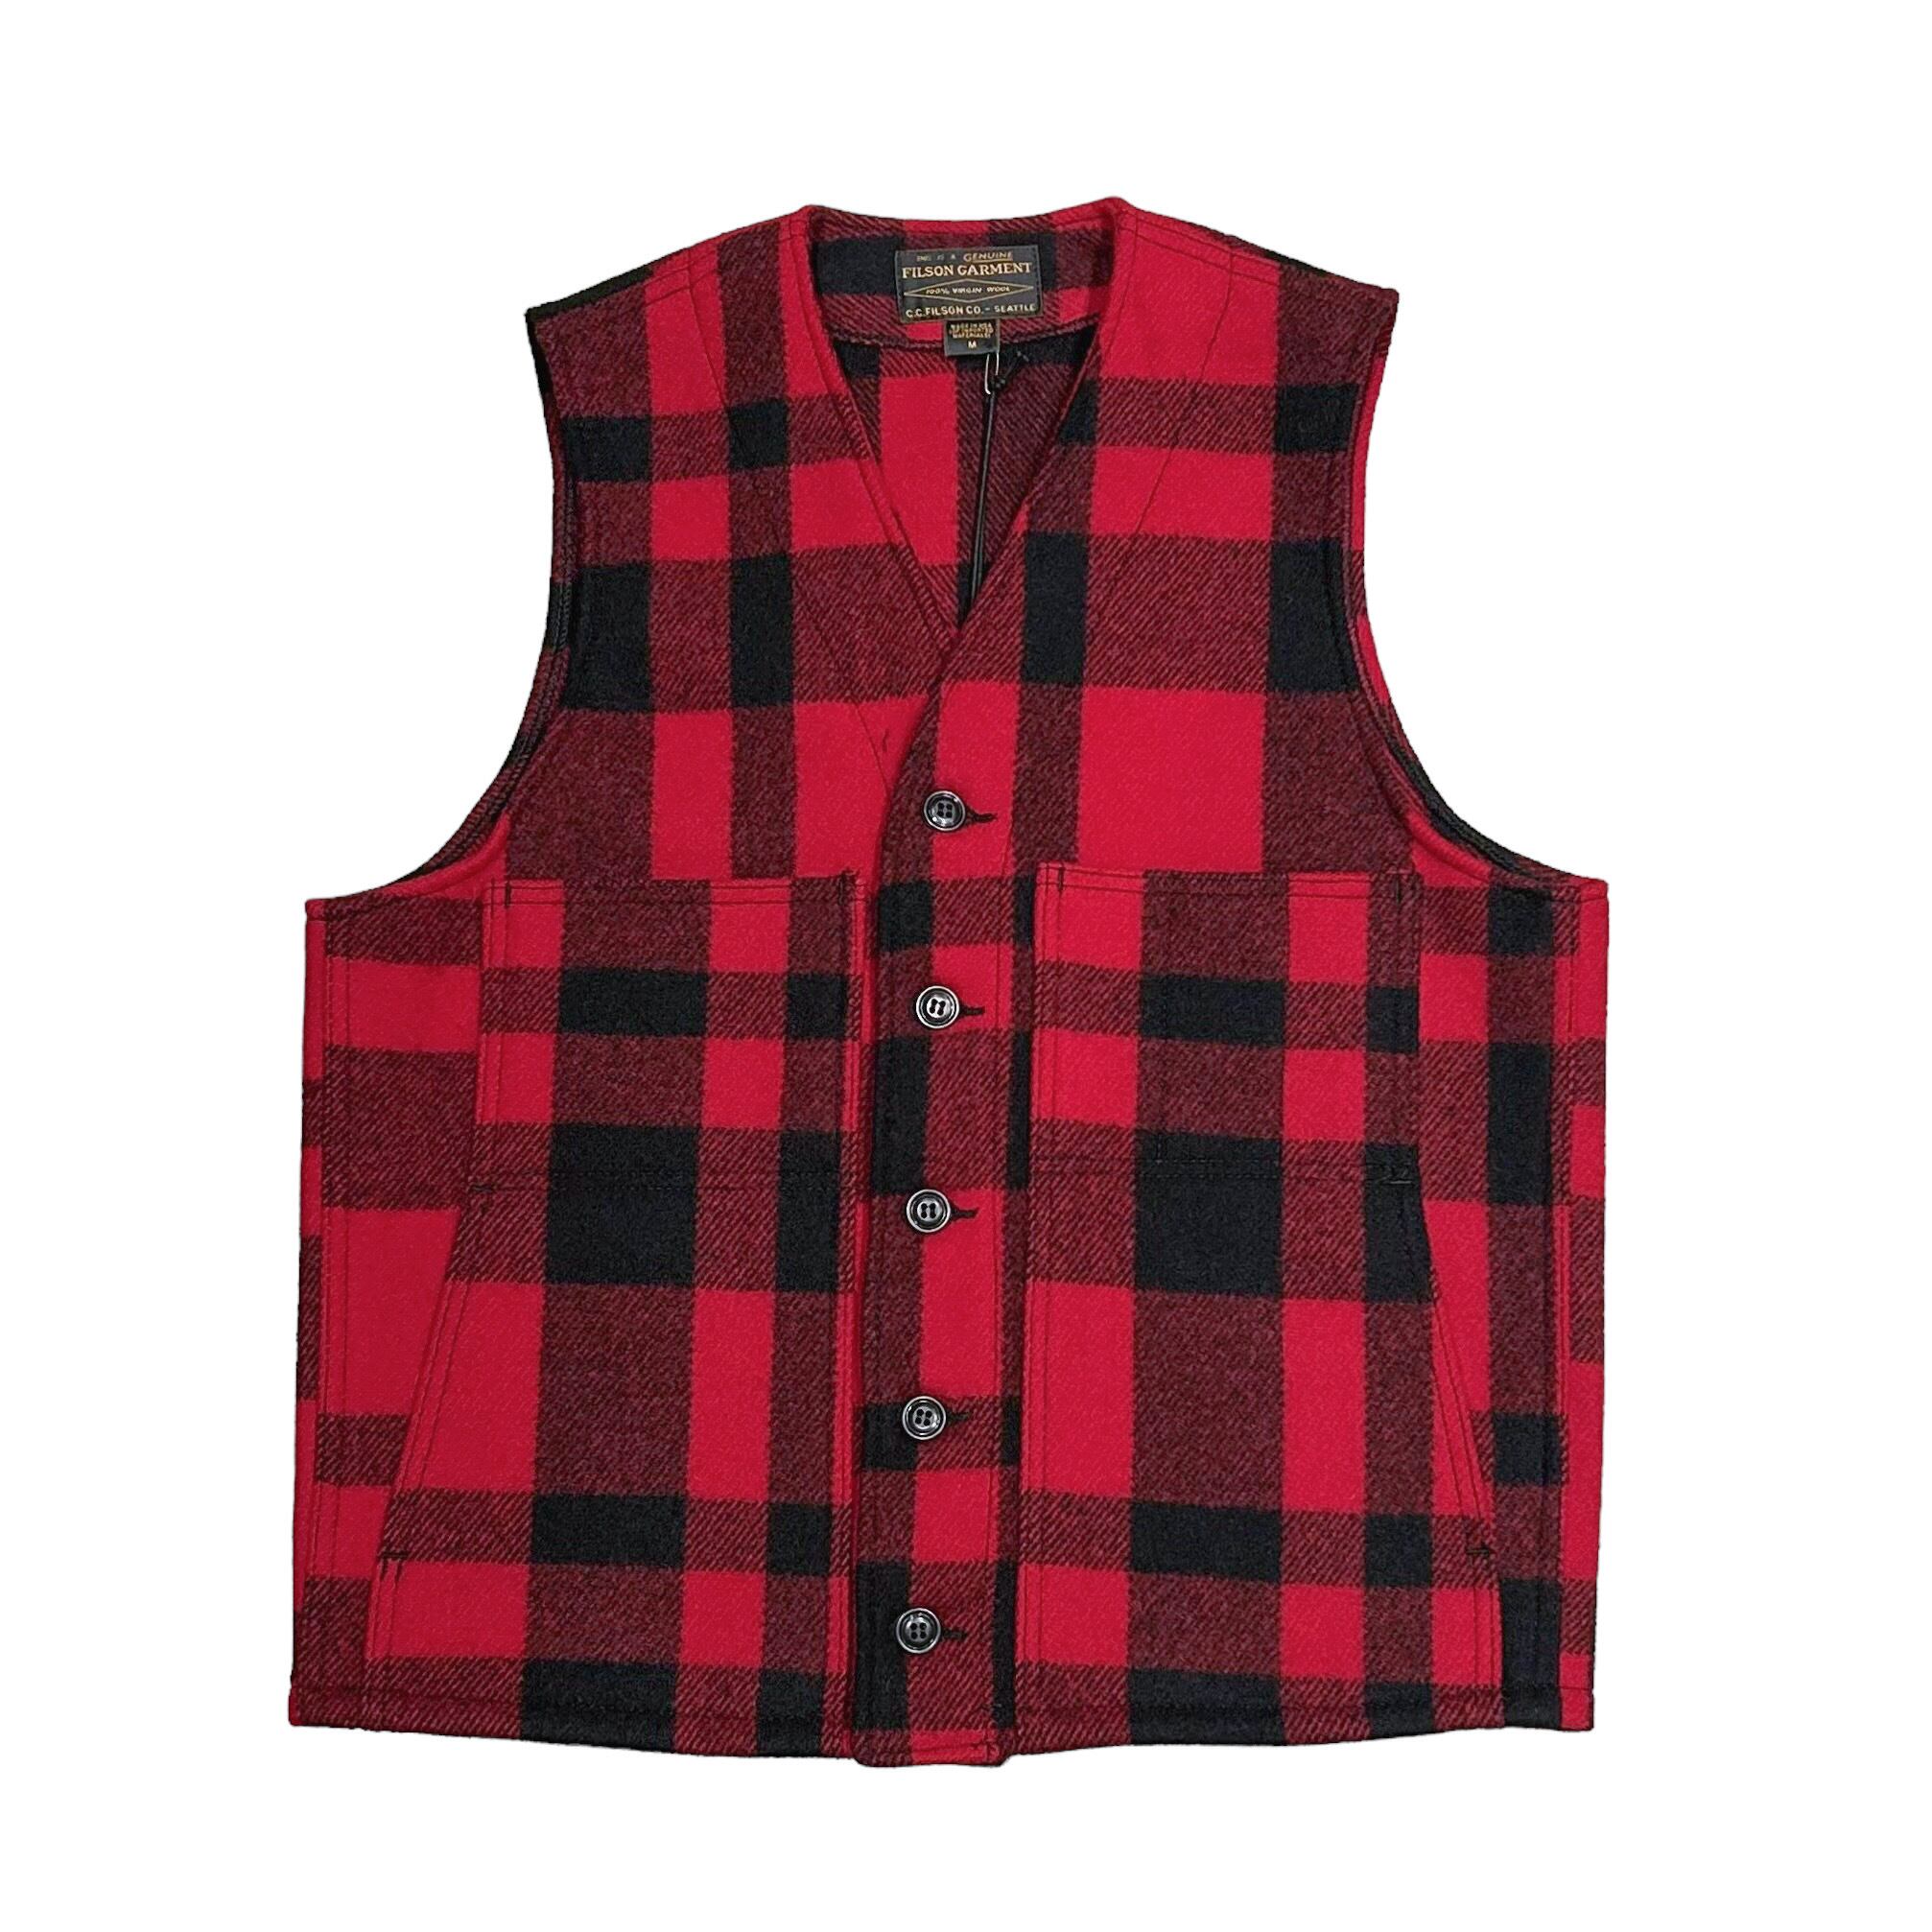 FILSON / MACKINAW WOOL VEST Charcoal Red/Black - Made in USA